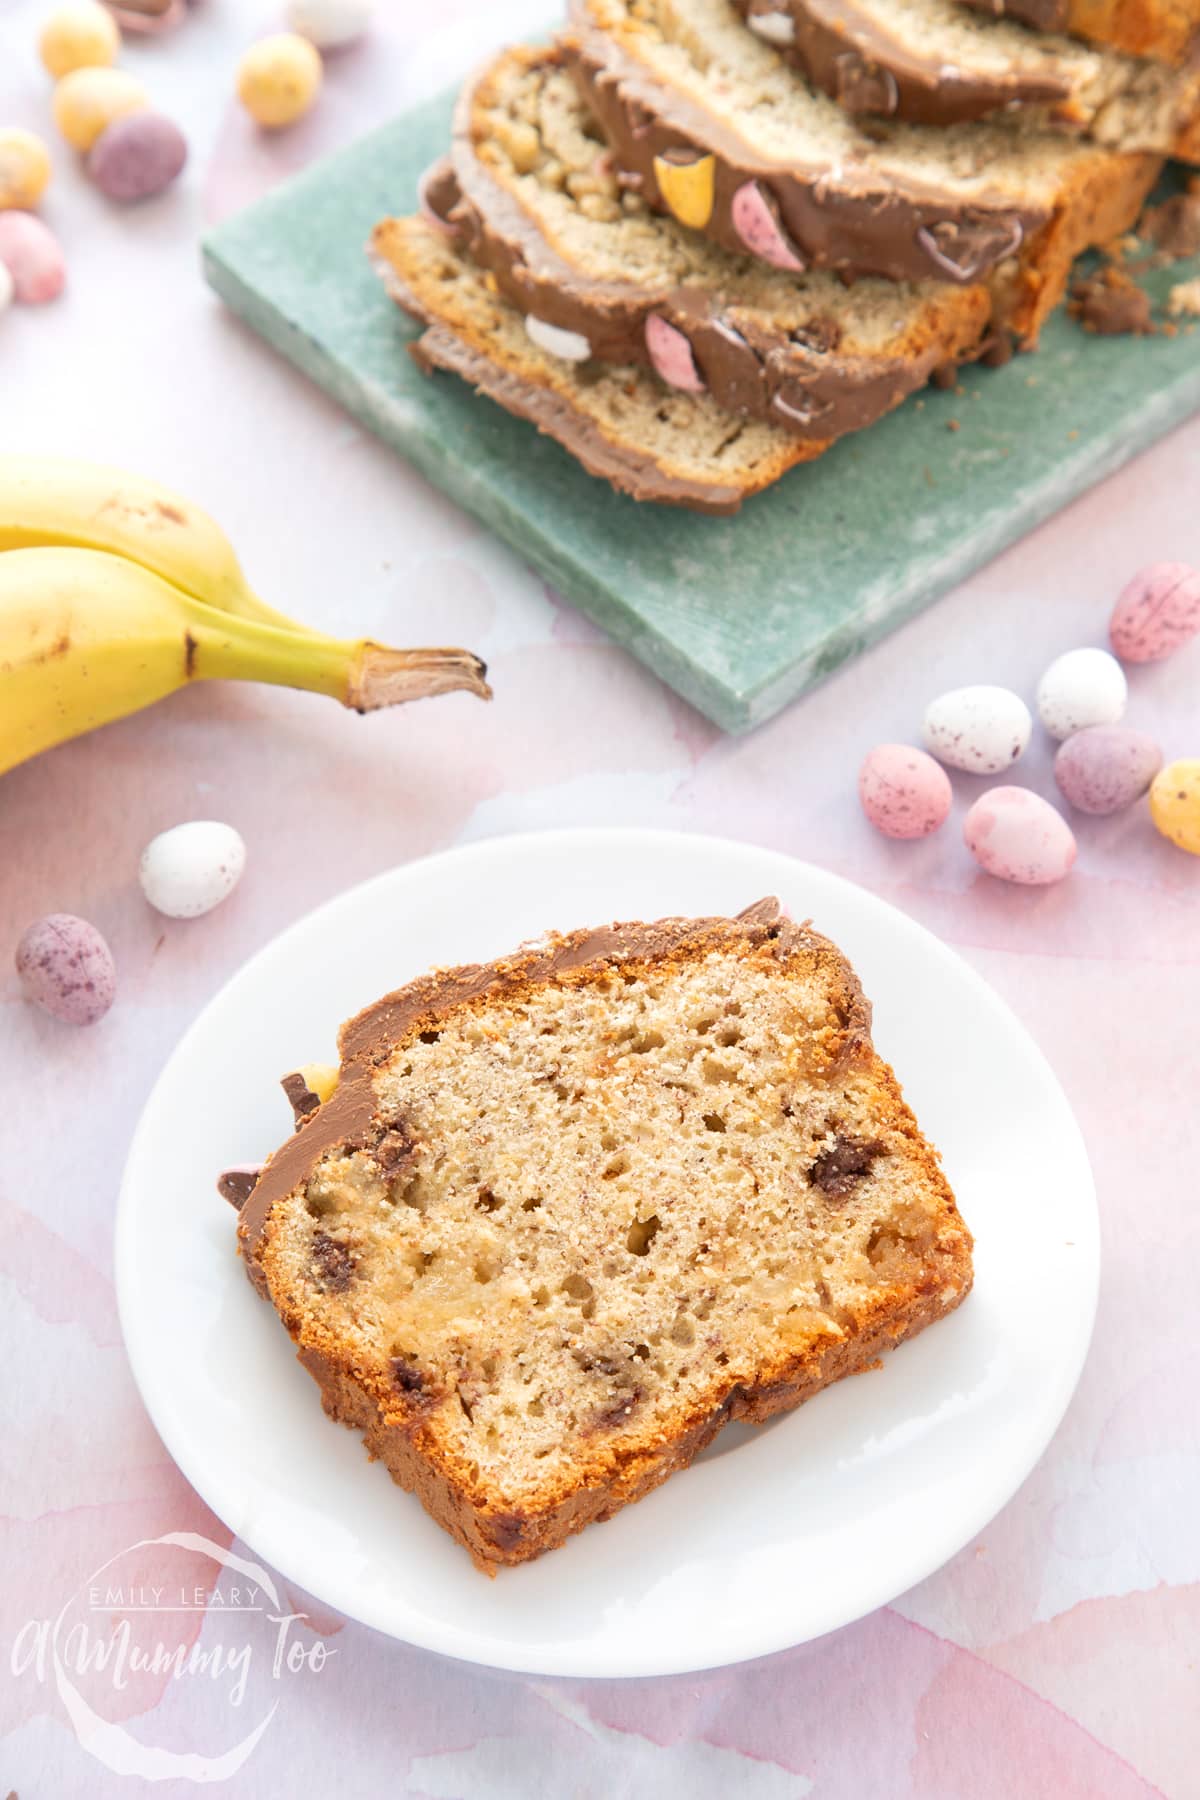 A slice of Easter banana bread on a white plate.